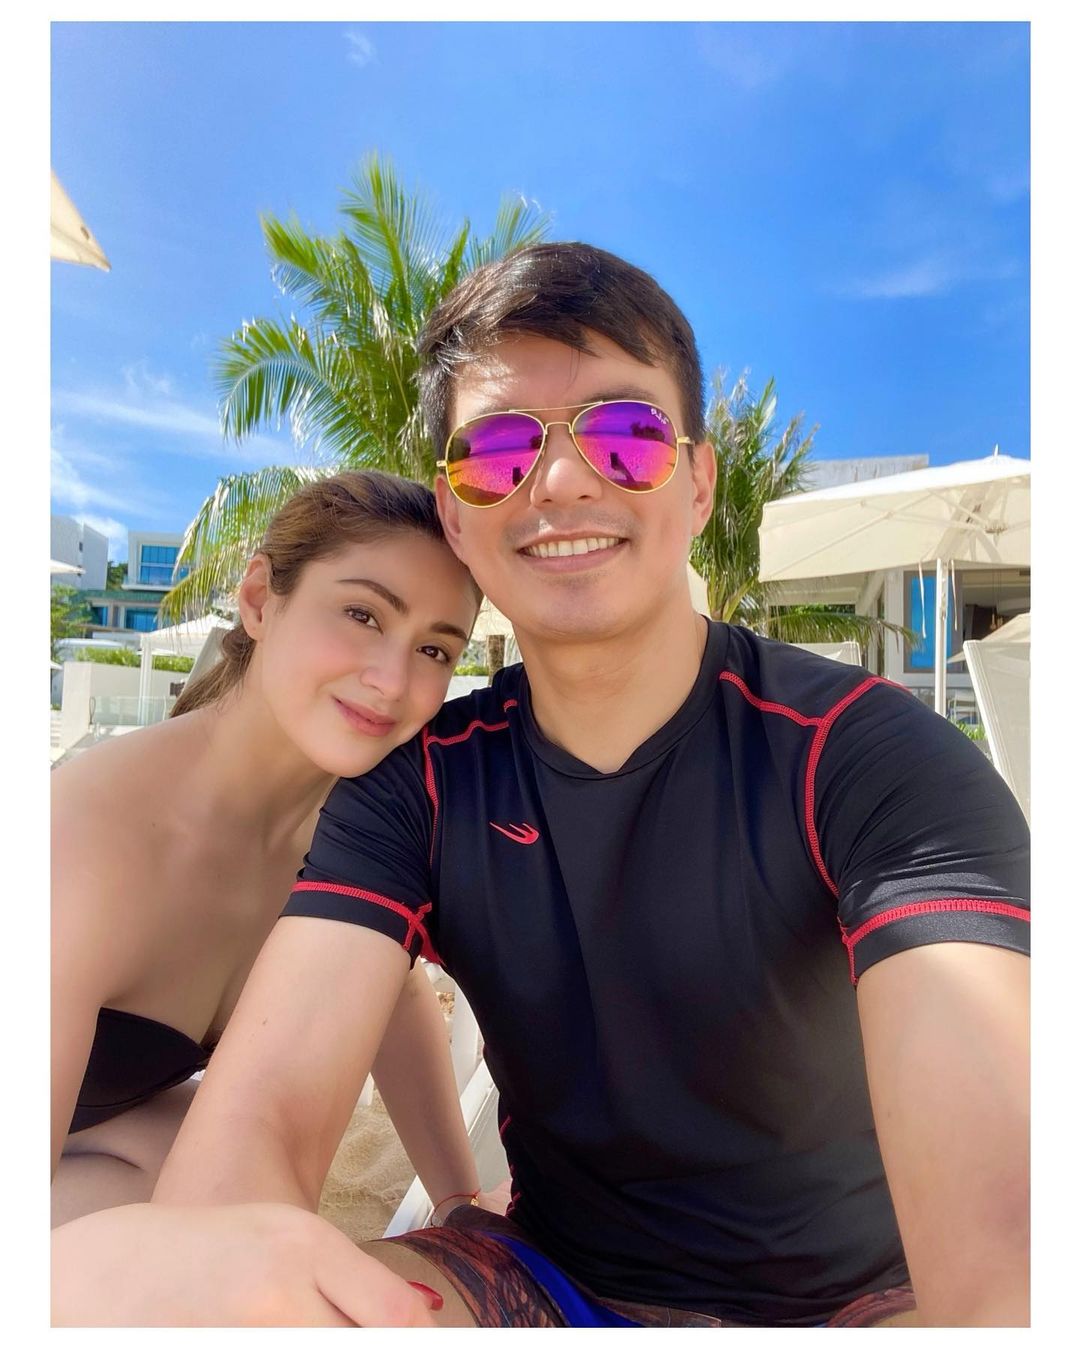 Carla Abellana and Tom Rodriguez infidelity issue